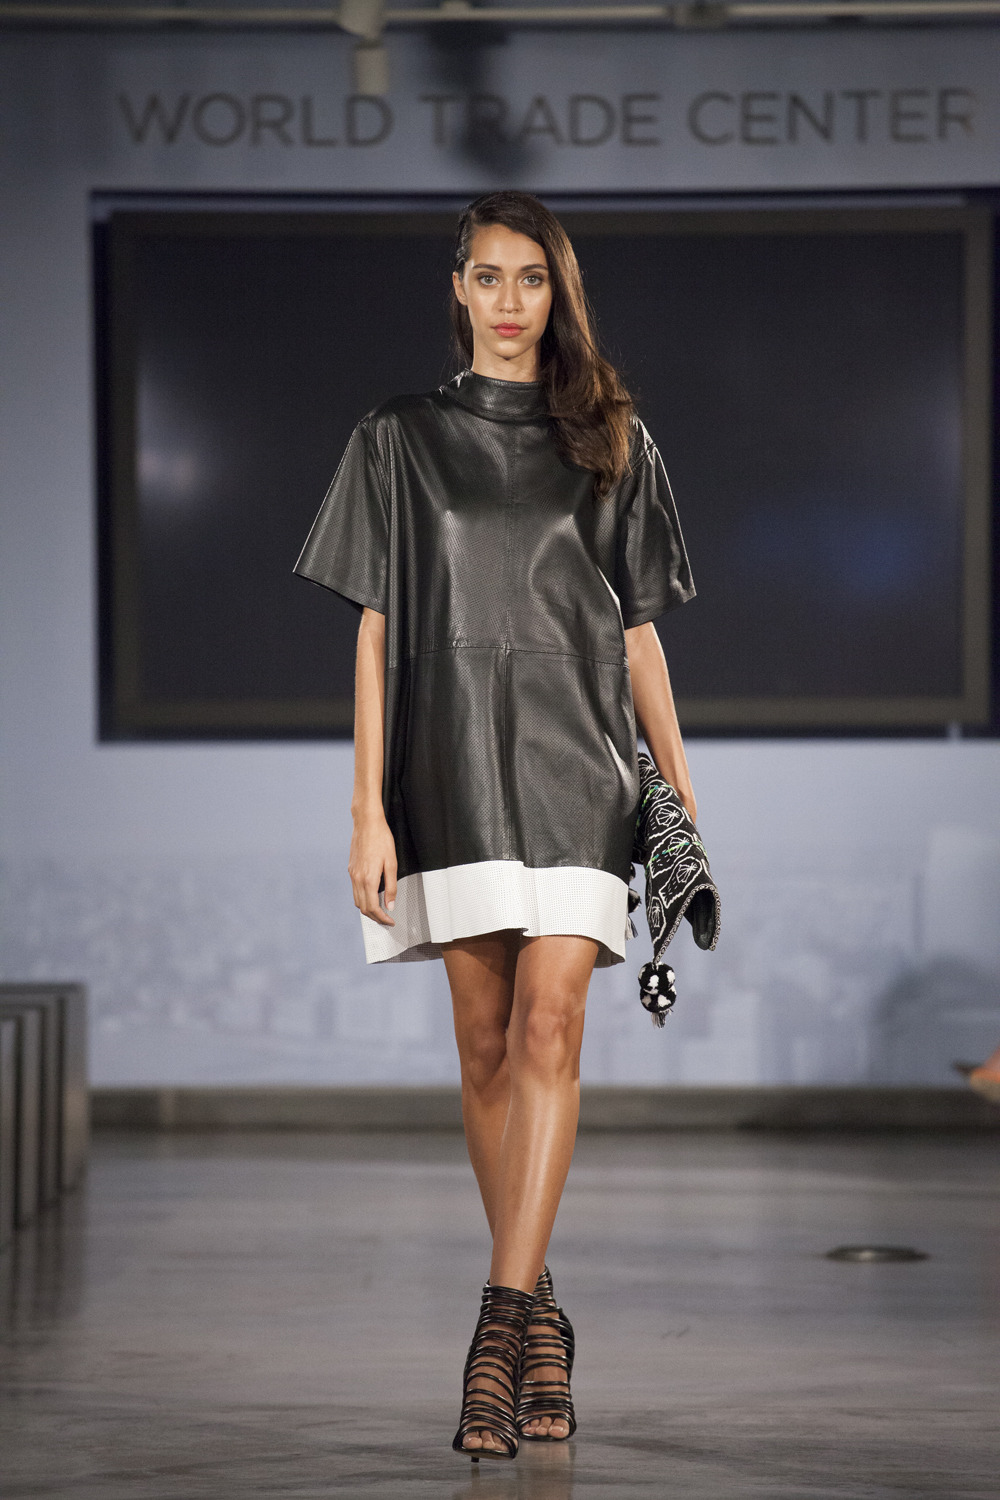 Inspection Report: Richard Seco Spring 2014 Men's and Women's Collection